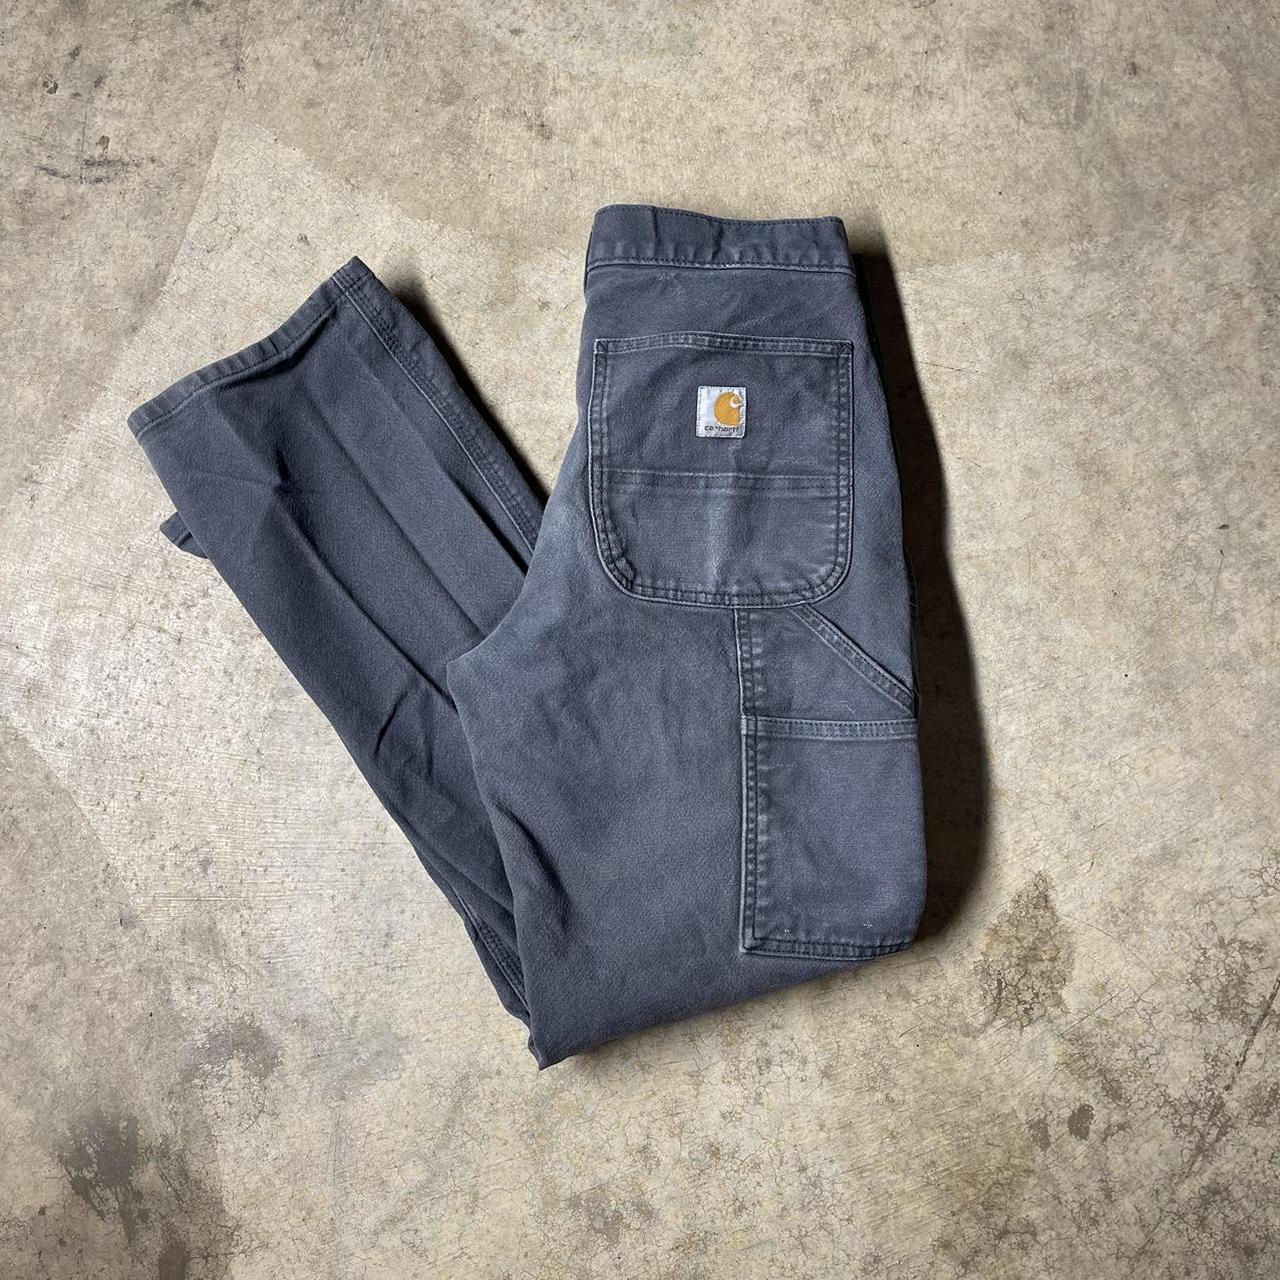 Carhartt double knees Relaxed fit Size 30x32 - Depop